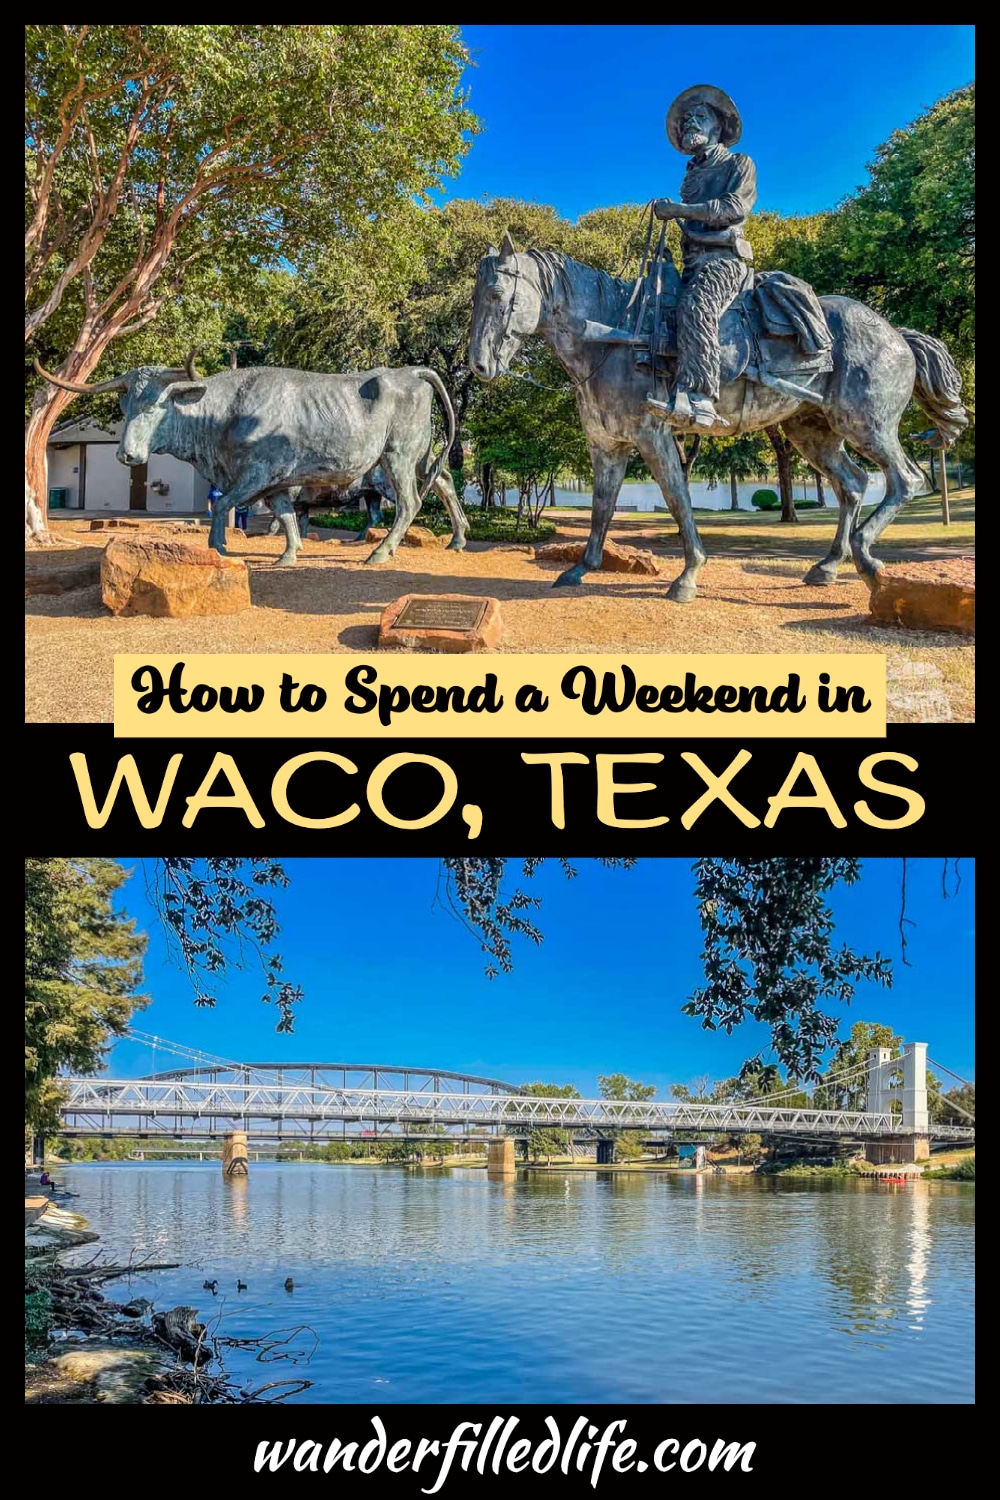 Waco, Texas offers a lot to see and do beyond all things Fixer Upper in a weekend, including exceptional parks, museums and food.